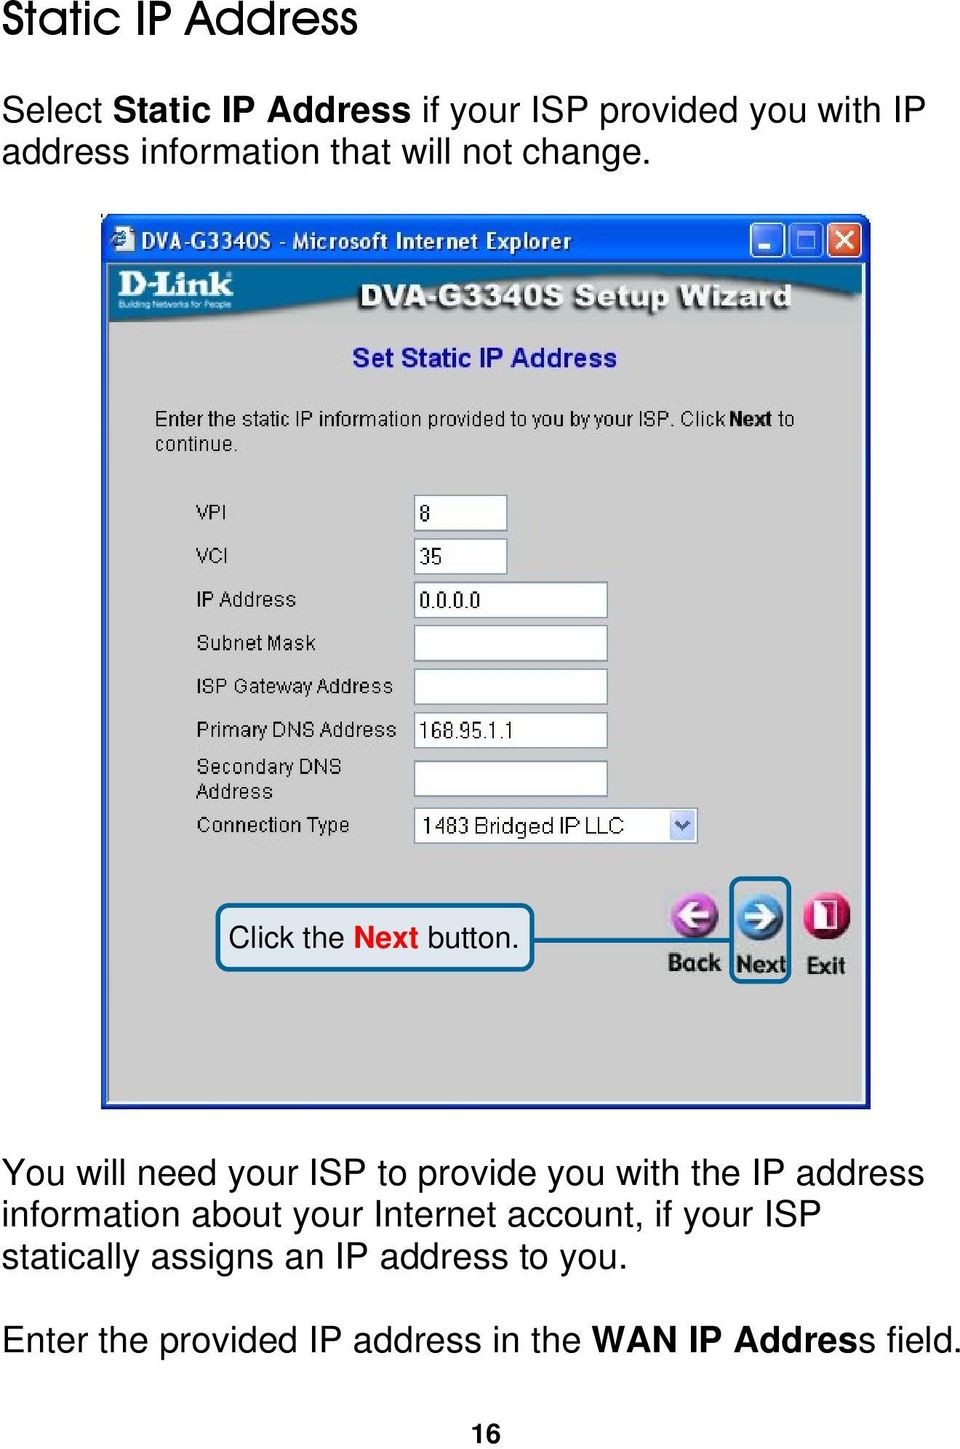 You will need your ISP to provide you with the IP address information about your